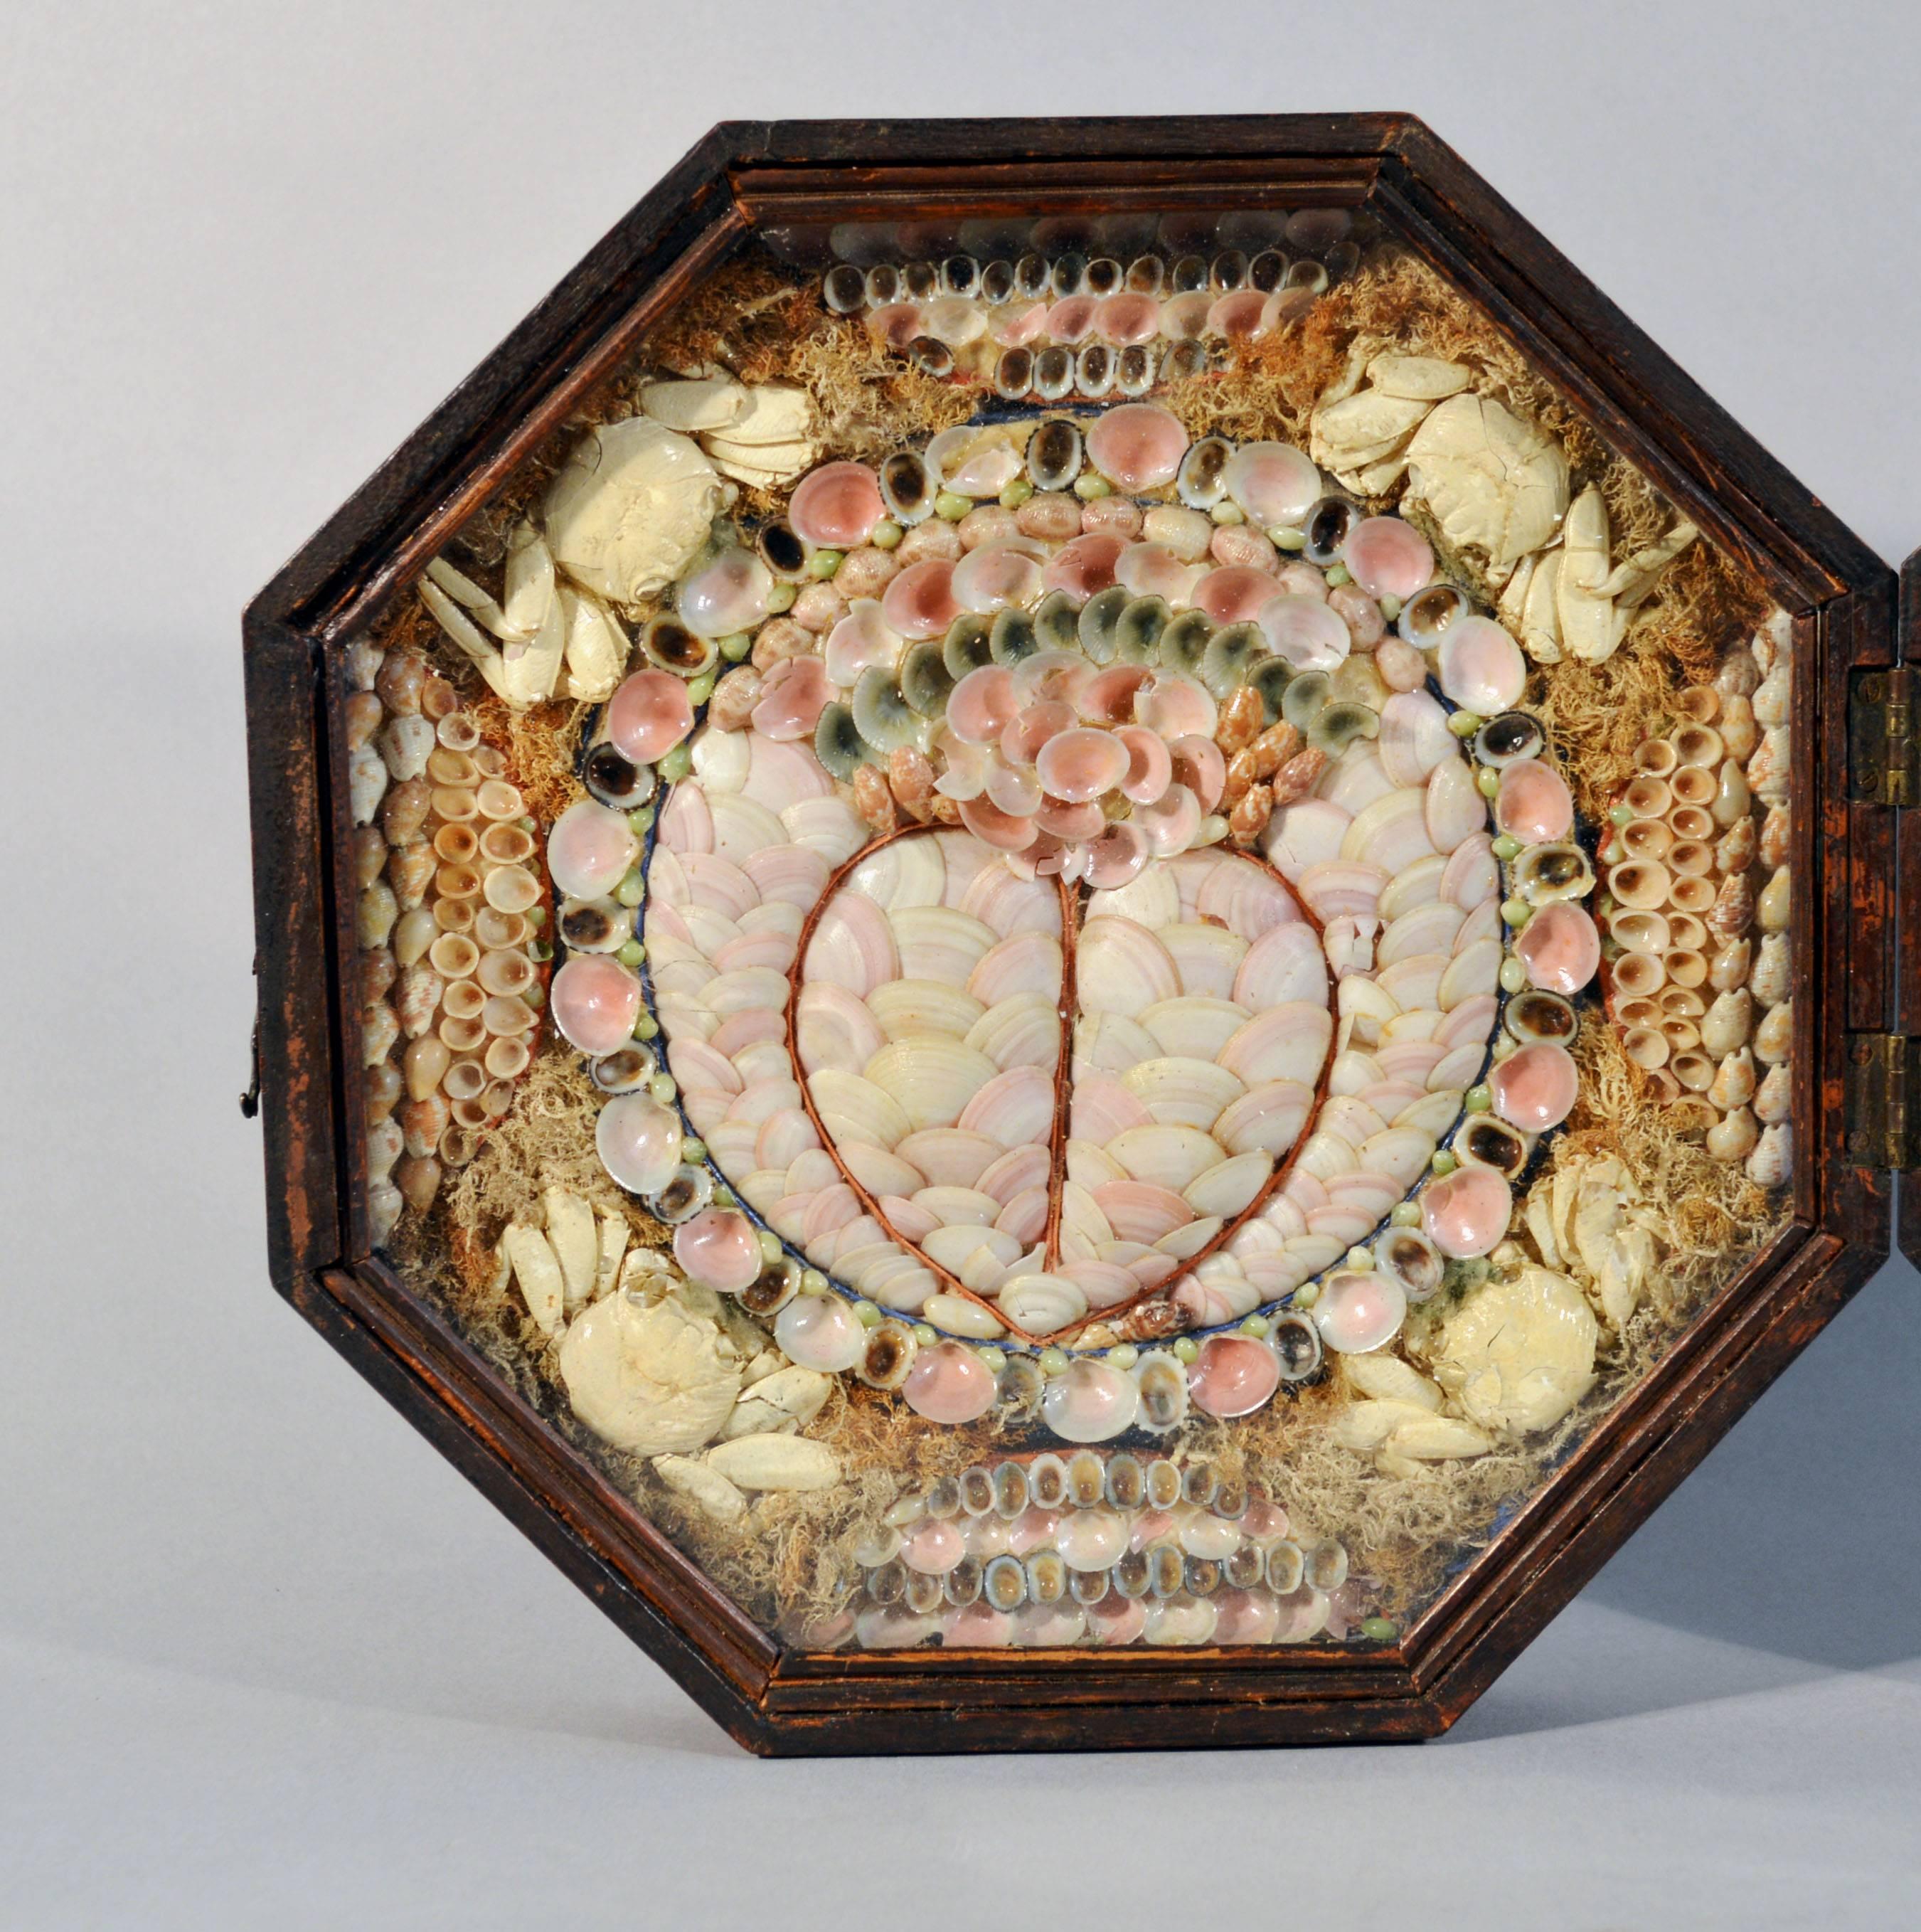 Sailor's valentine,
Remember me,
Barbados,
circa 1885.

The double sailor's valentine is composed of seashells in different colors. The left panel has a heart to the centre and crab shells to the four corners. The right panel has the motto